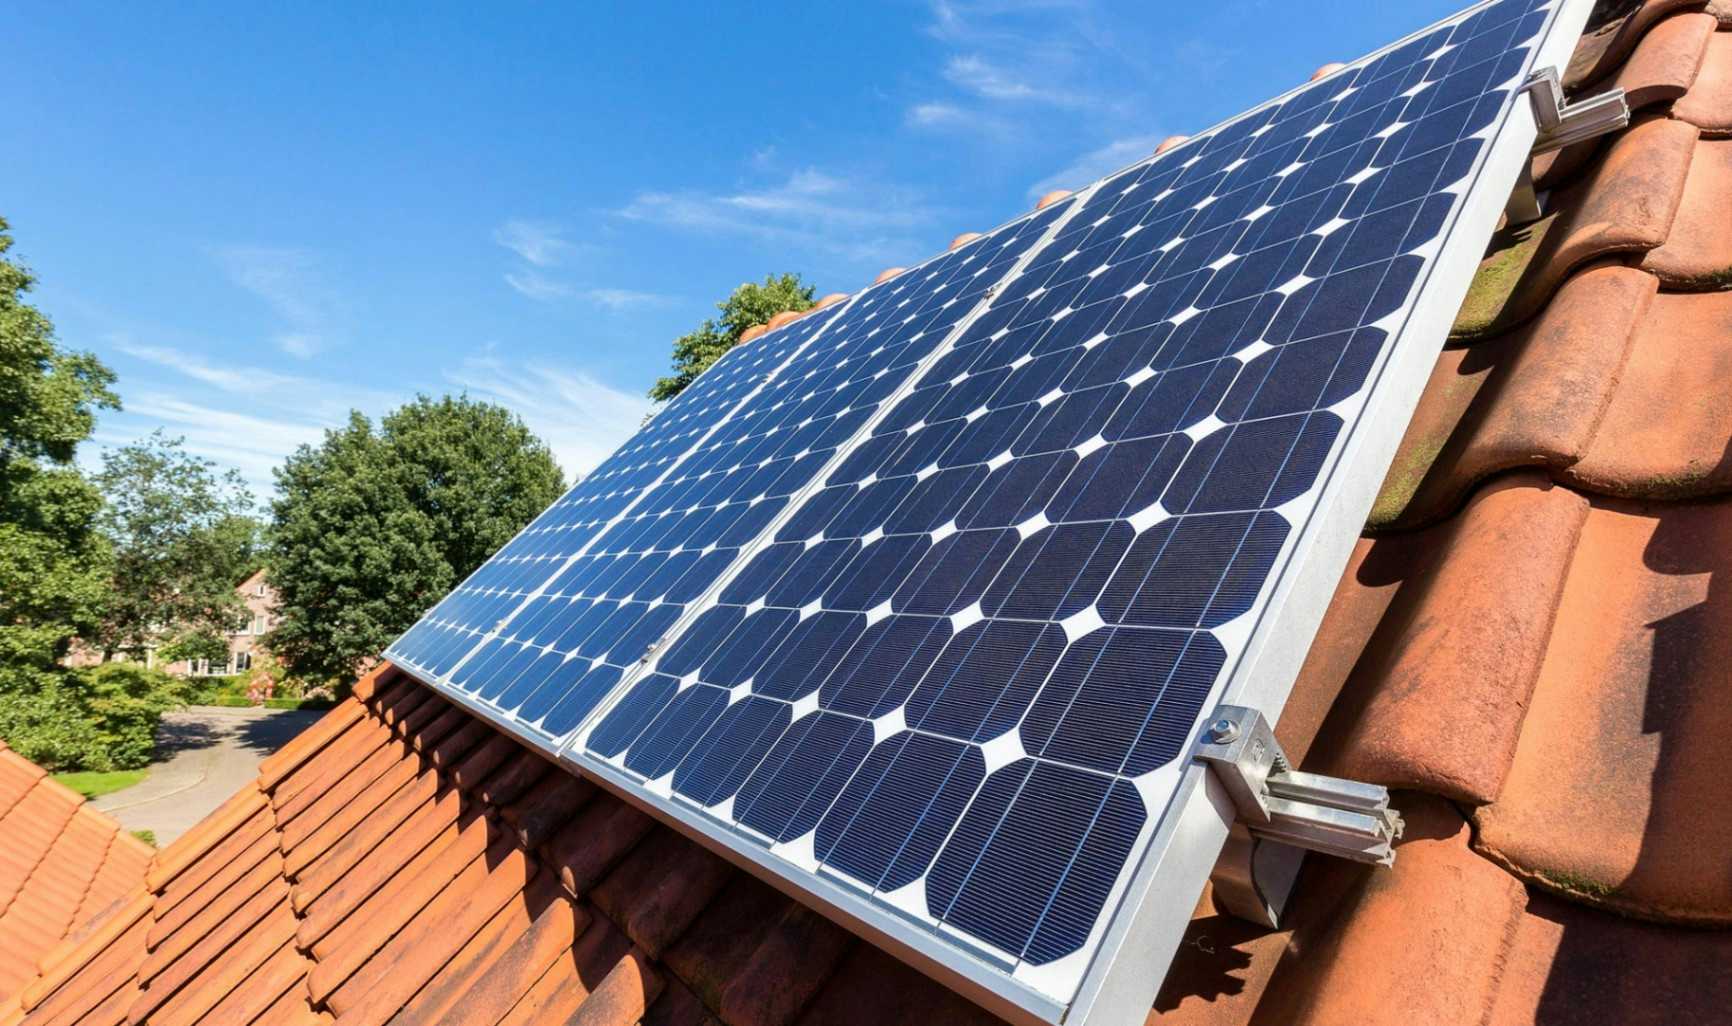 Rooftop solar project: Unsolicited bid raises concerns